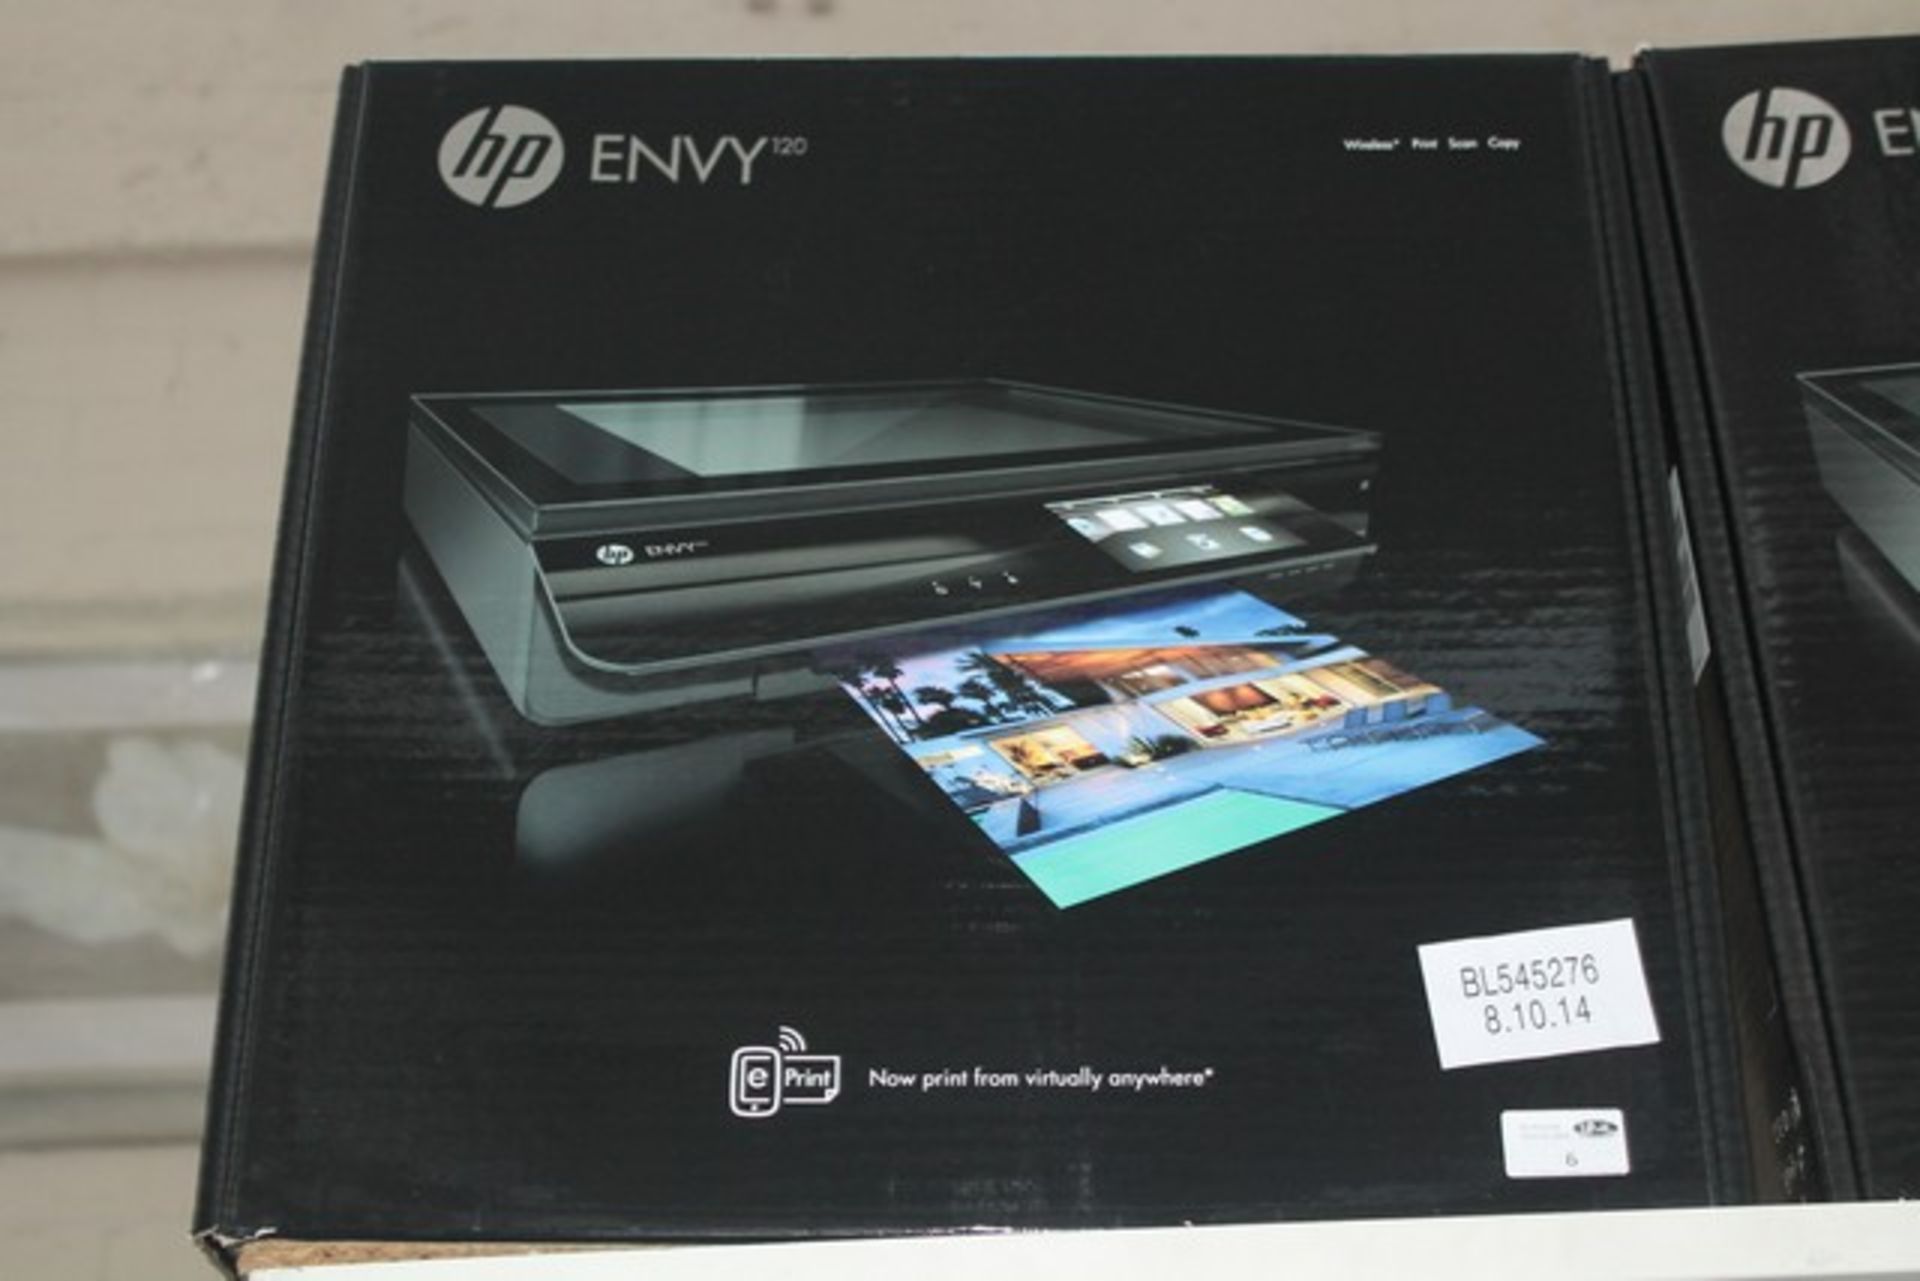 1 x BOXED HP ENVY 120 ALL IN ONE PRINTER SCANNER COPIER (545276) (8/10/2014)  *Please note that